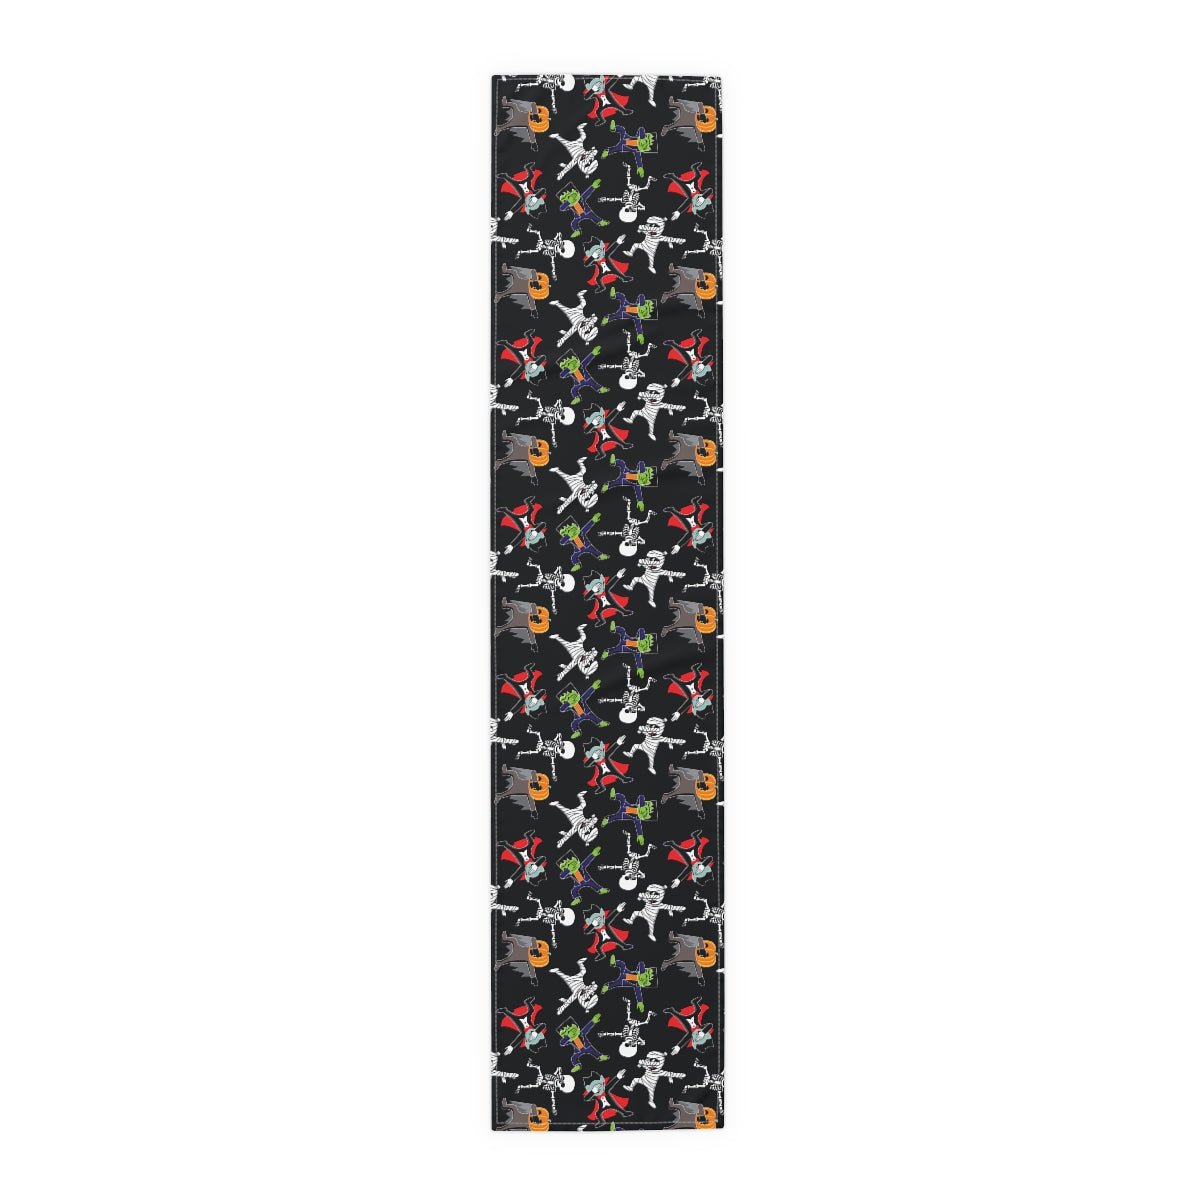 Dancing Halloween Monsters Table Runner - Puffin Lime